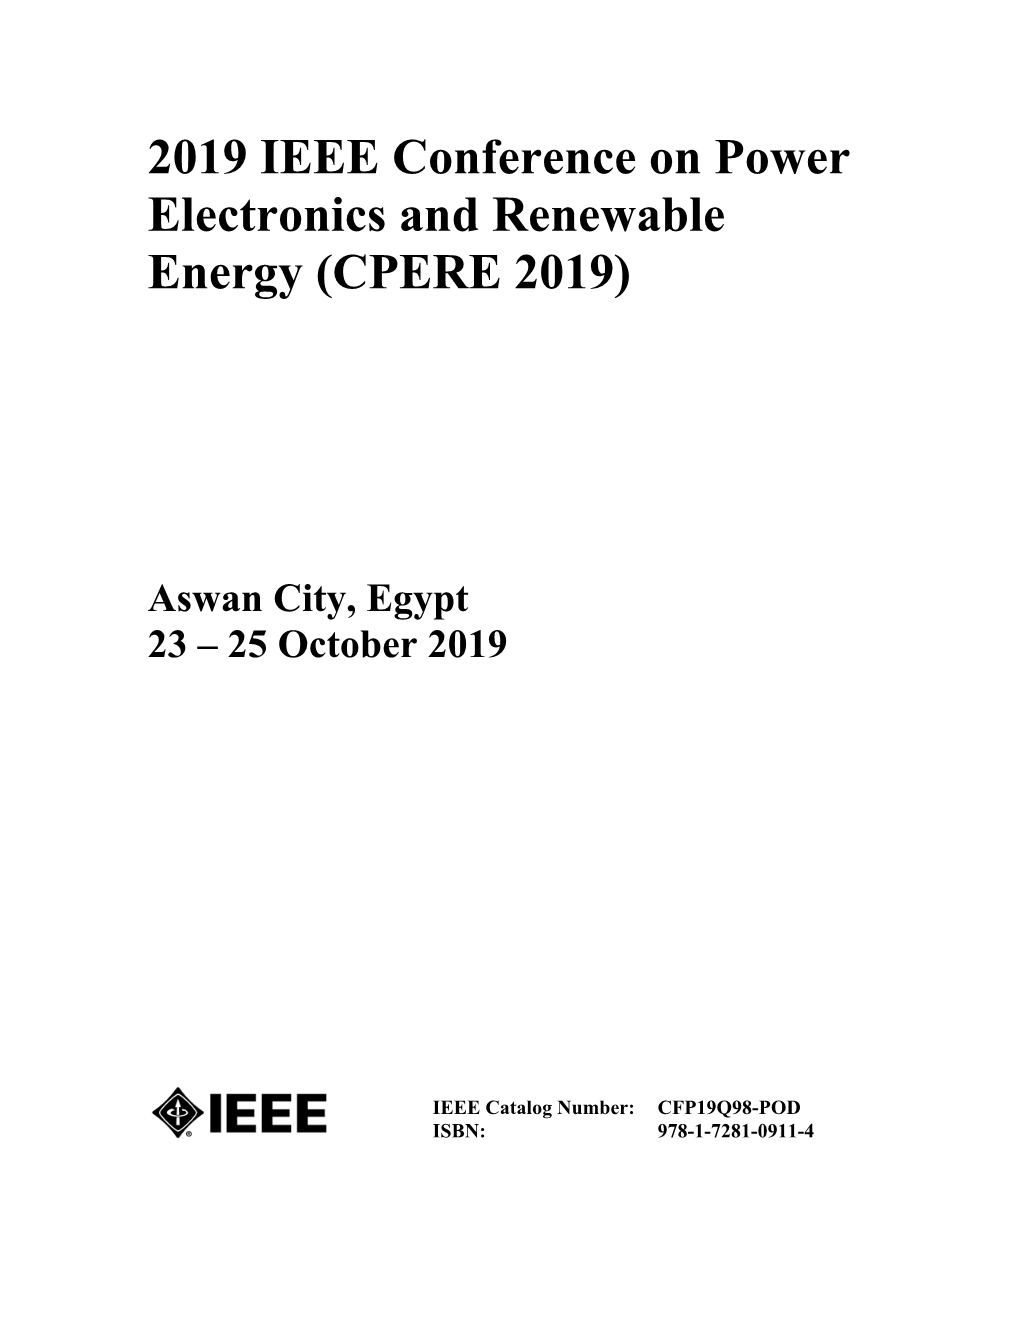 2019 IEEE Conference on Power Electronics and Renewable